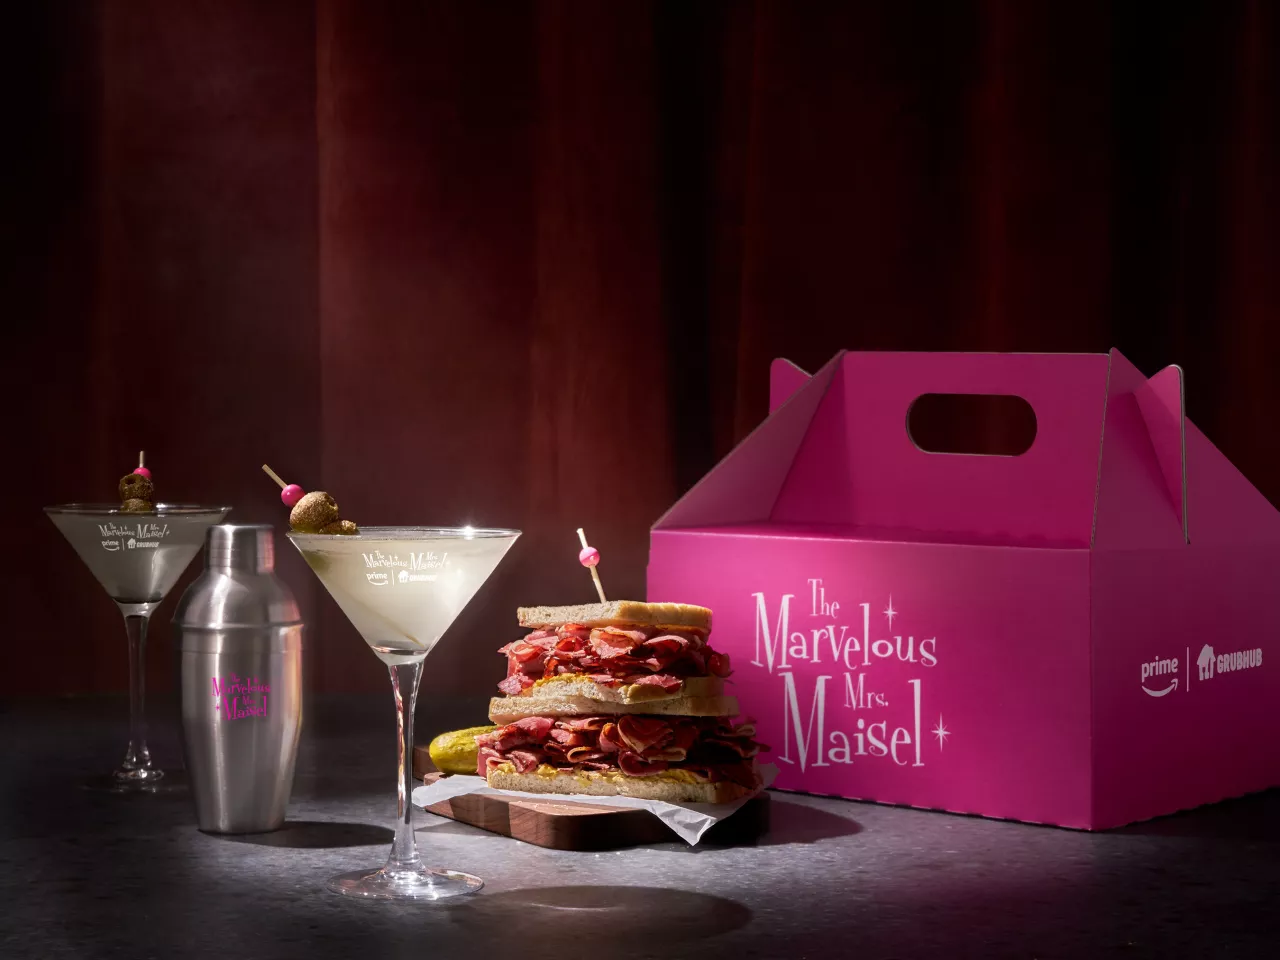 The Maisel Tov Martini will be available only on Grubhub to Manhattan diners in celebration of the season 5 premiere of The Marvelous Mrs. Maisel img#1